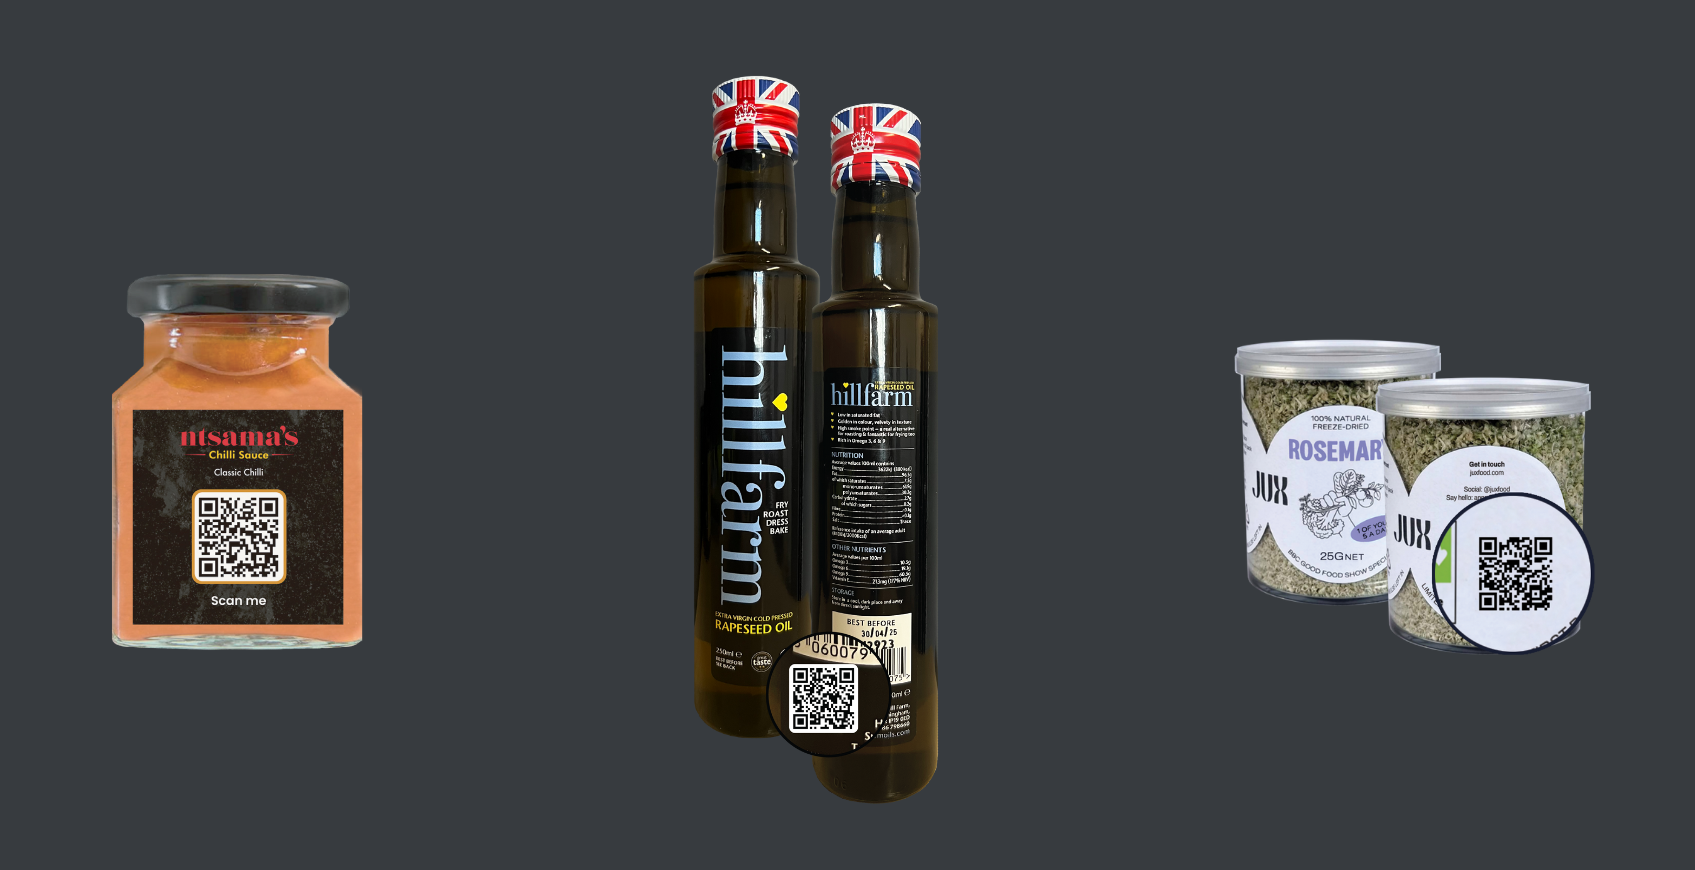 Ntsama, Hillfarm Oils and JUX Food products with GS1 Digital Link barcodes.